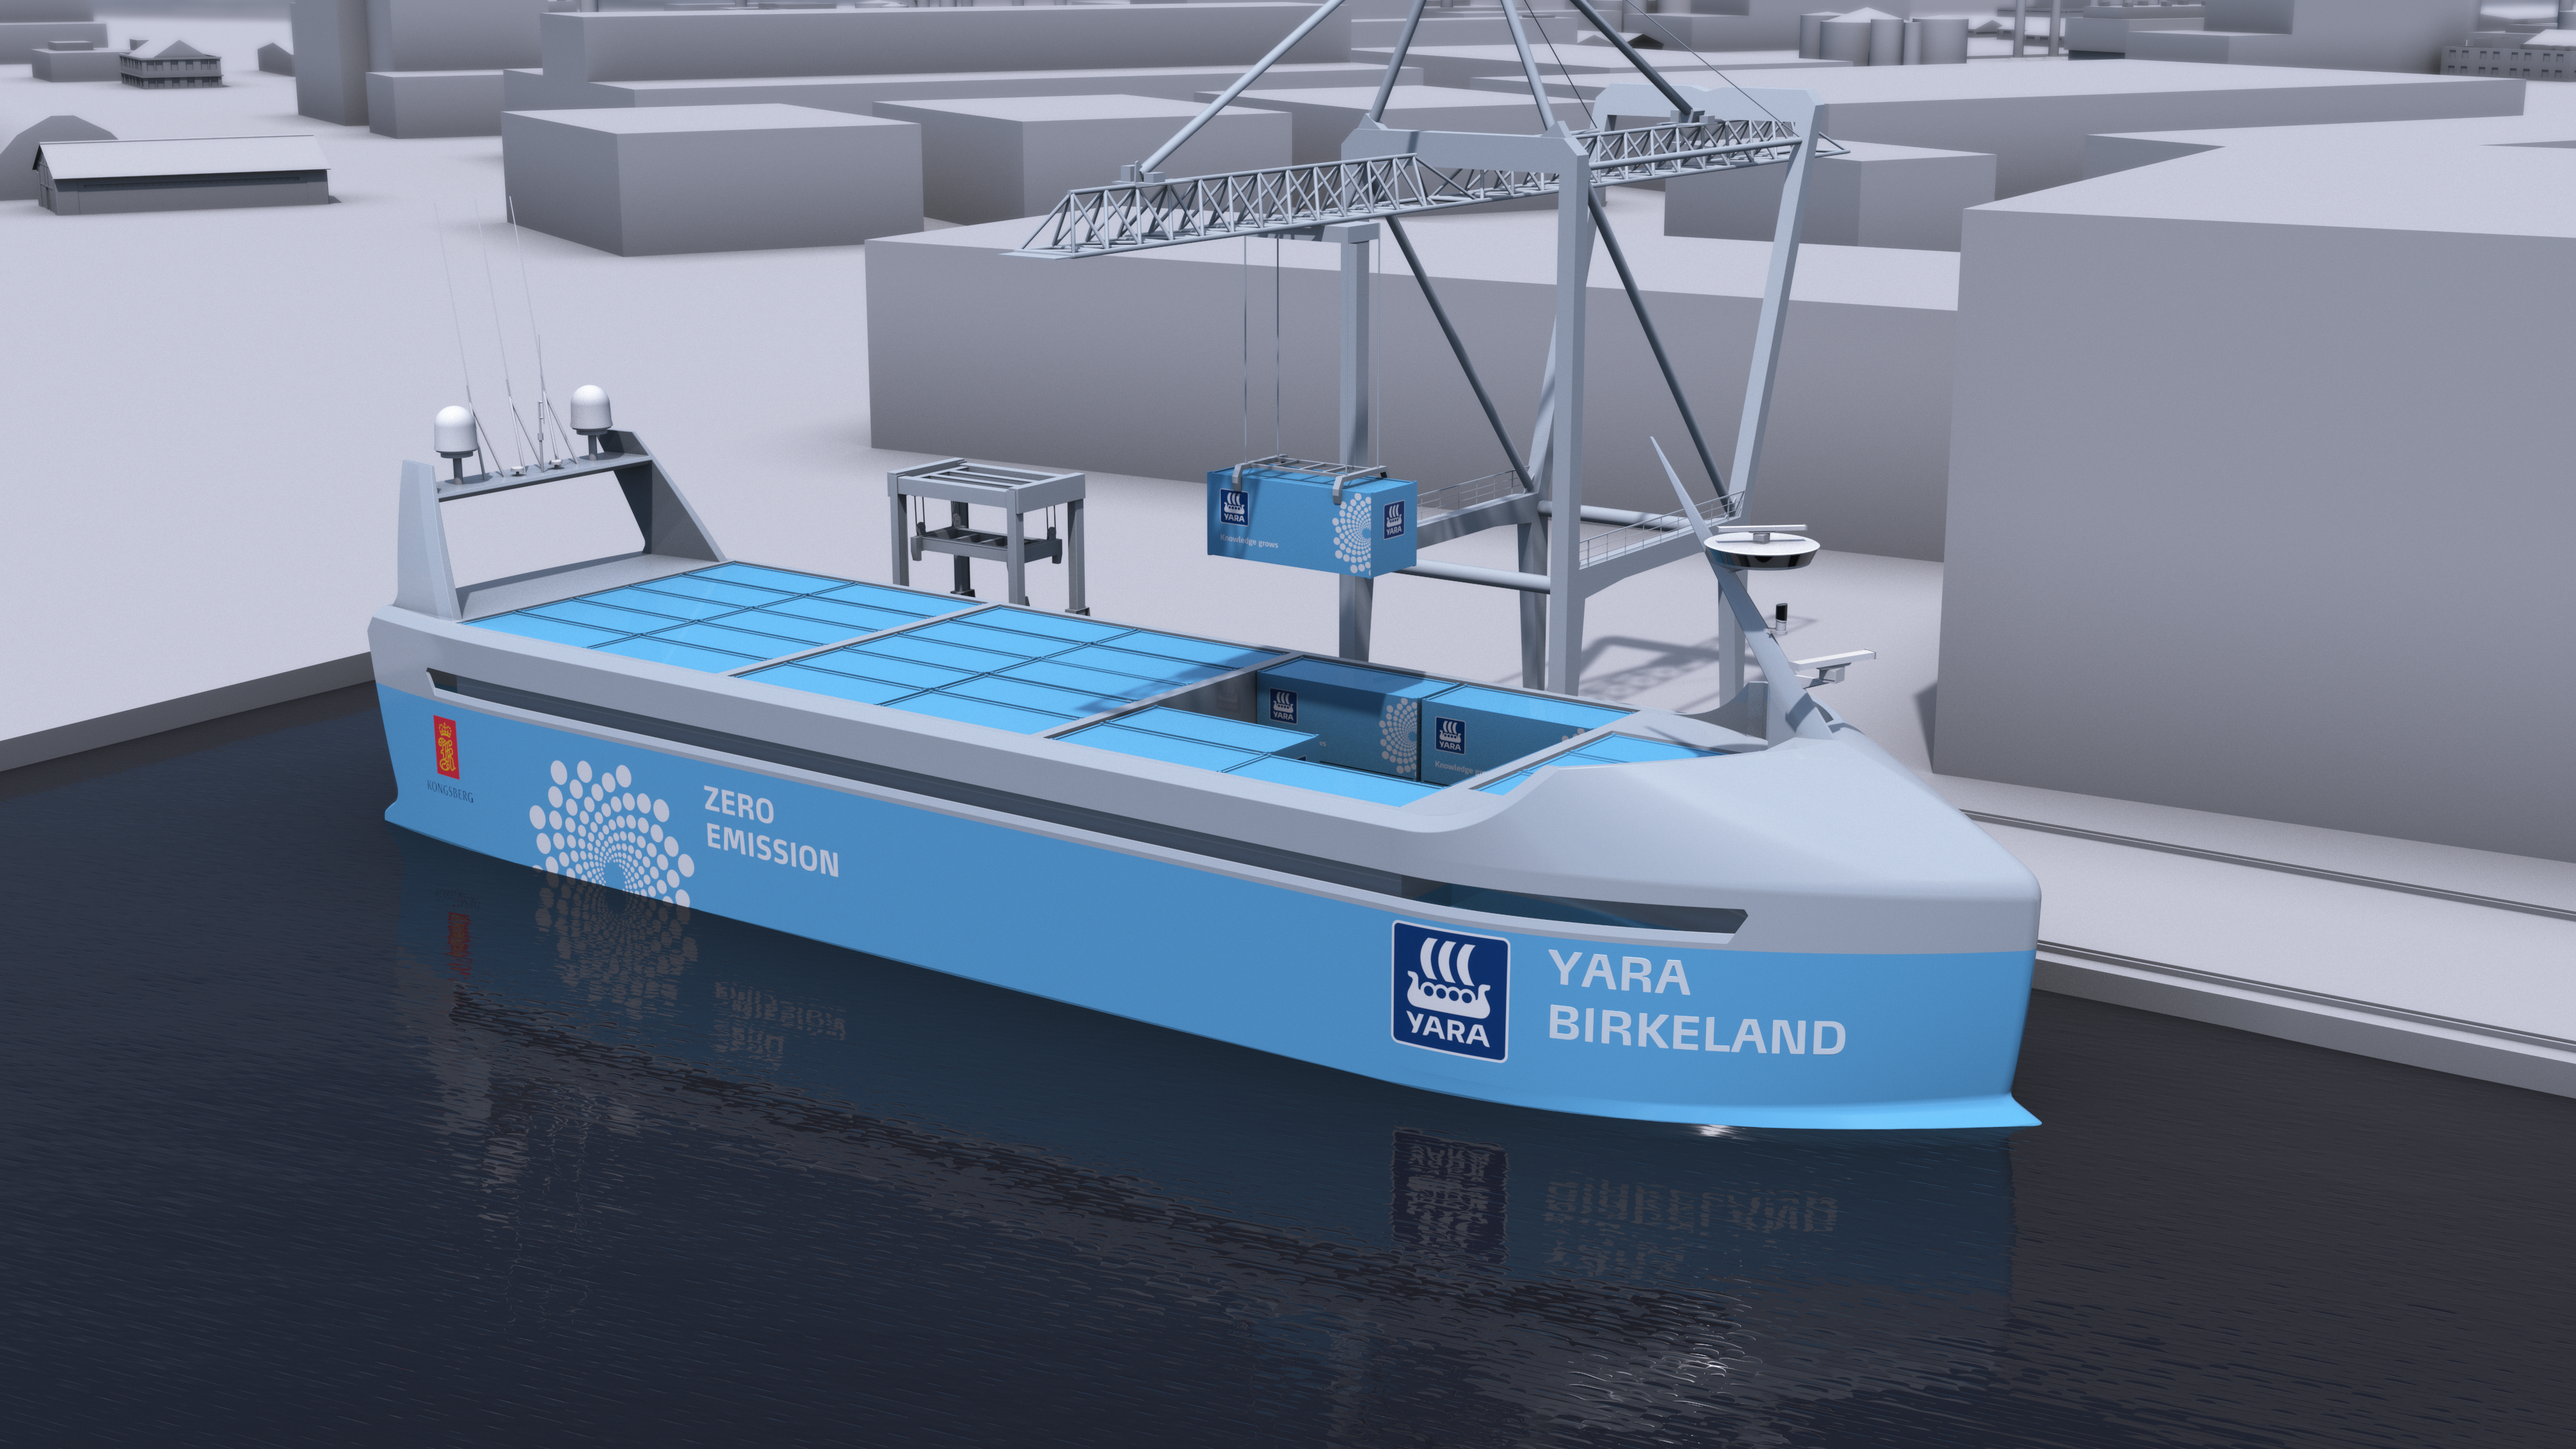 Crewless electric cargo ships may be horizon in Norway | Ars Technica